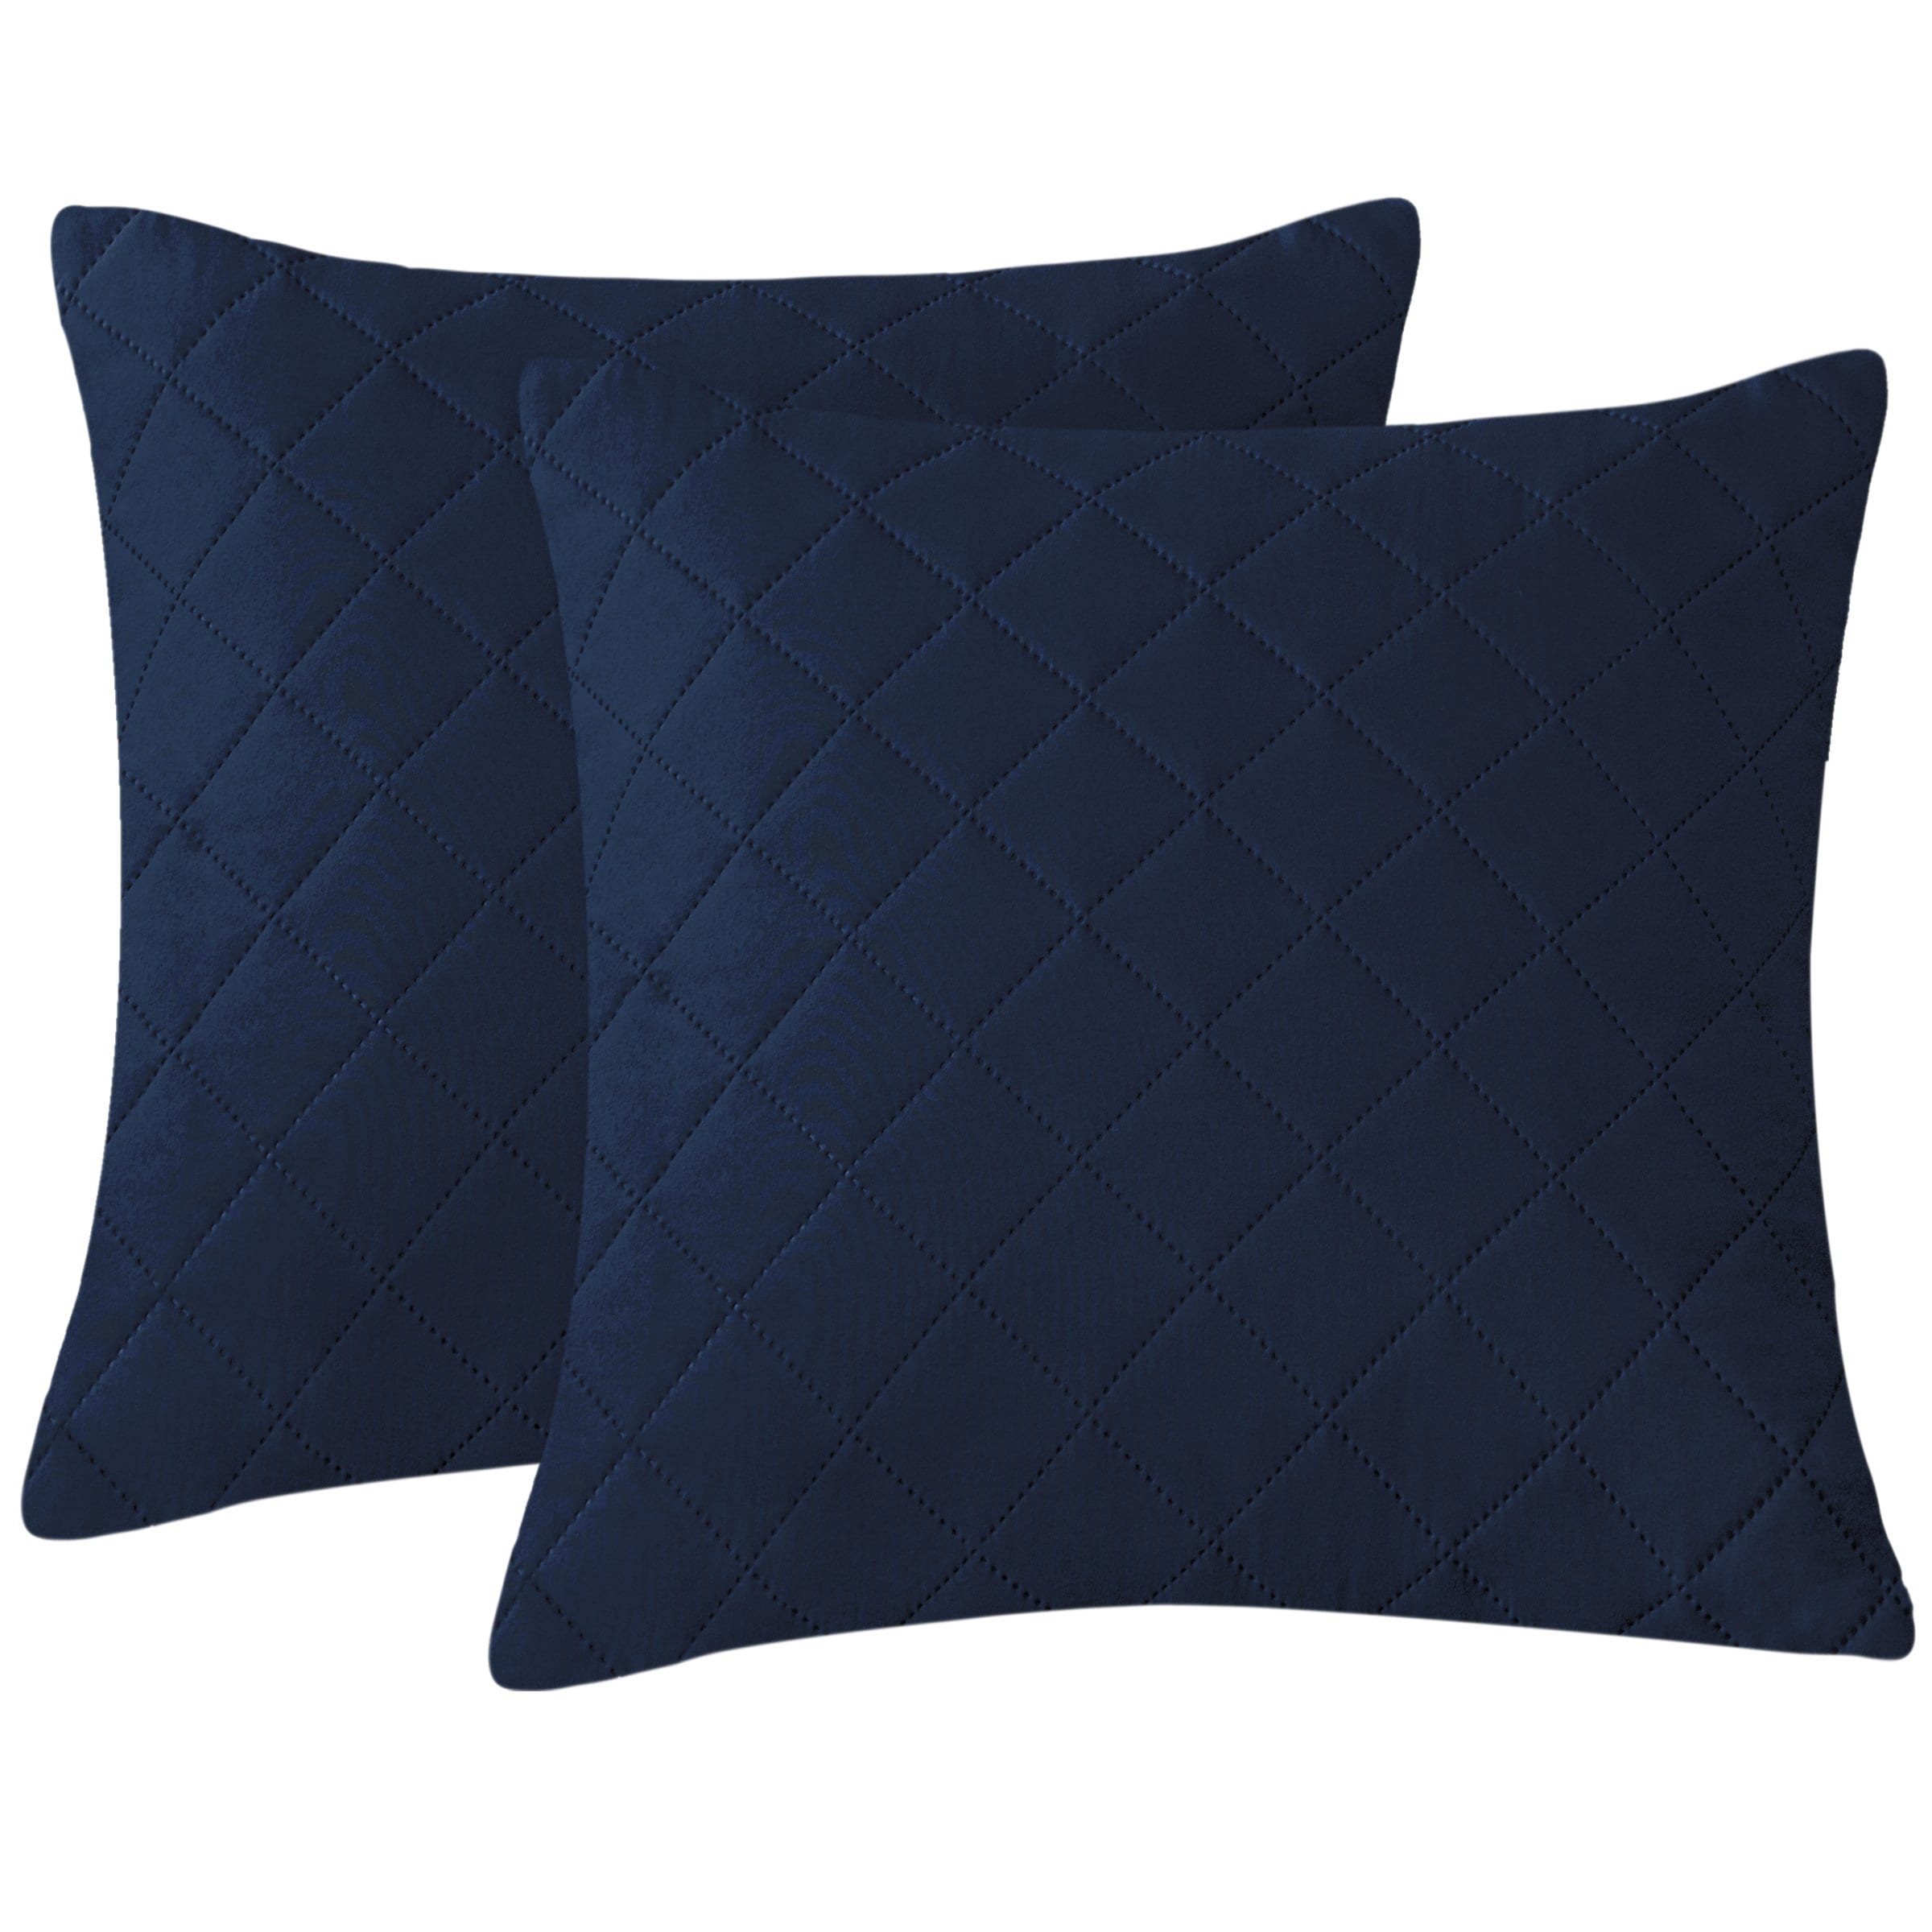 Cheer Collection Standard Size Sham Inserts - Comfortable Hollow Fiber 20 x 28 Bed Pillows, Set of 4